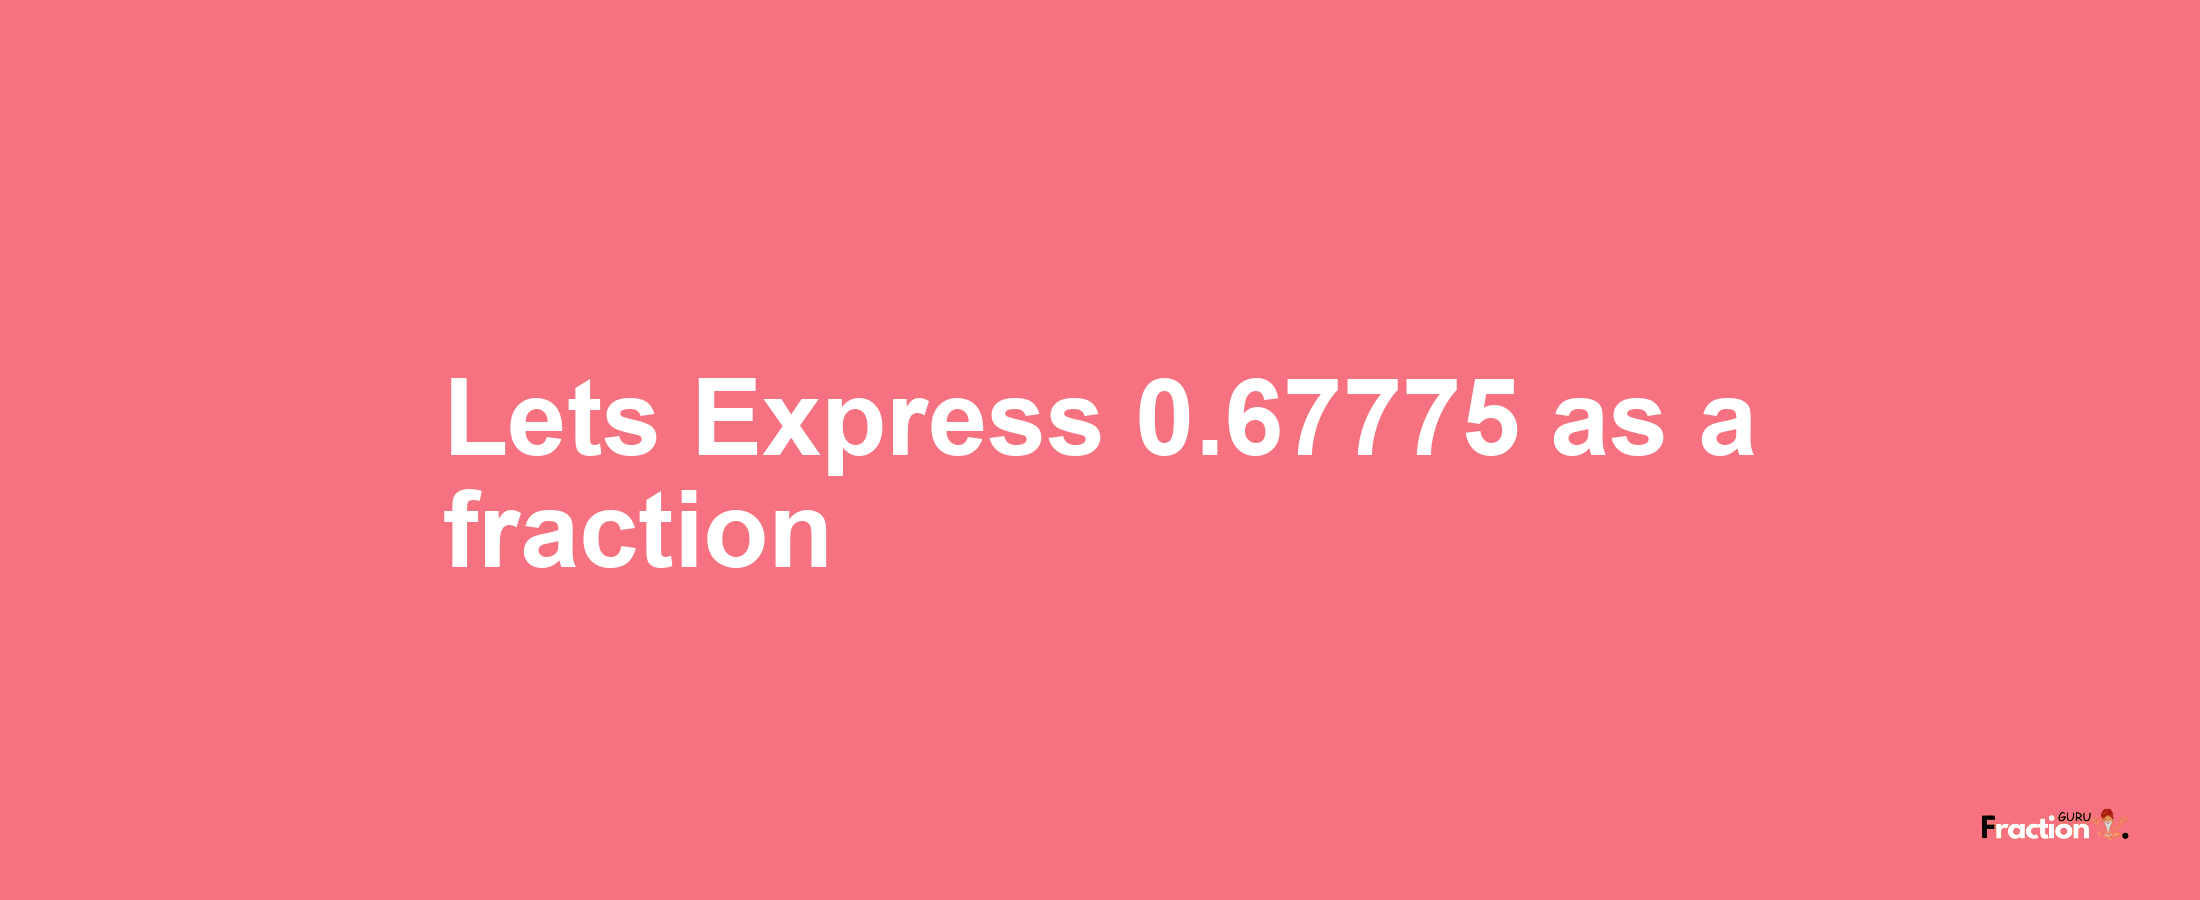 Lets Express 0.67775 as afraction